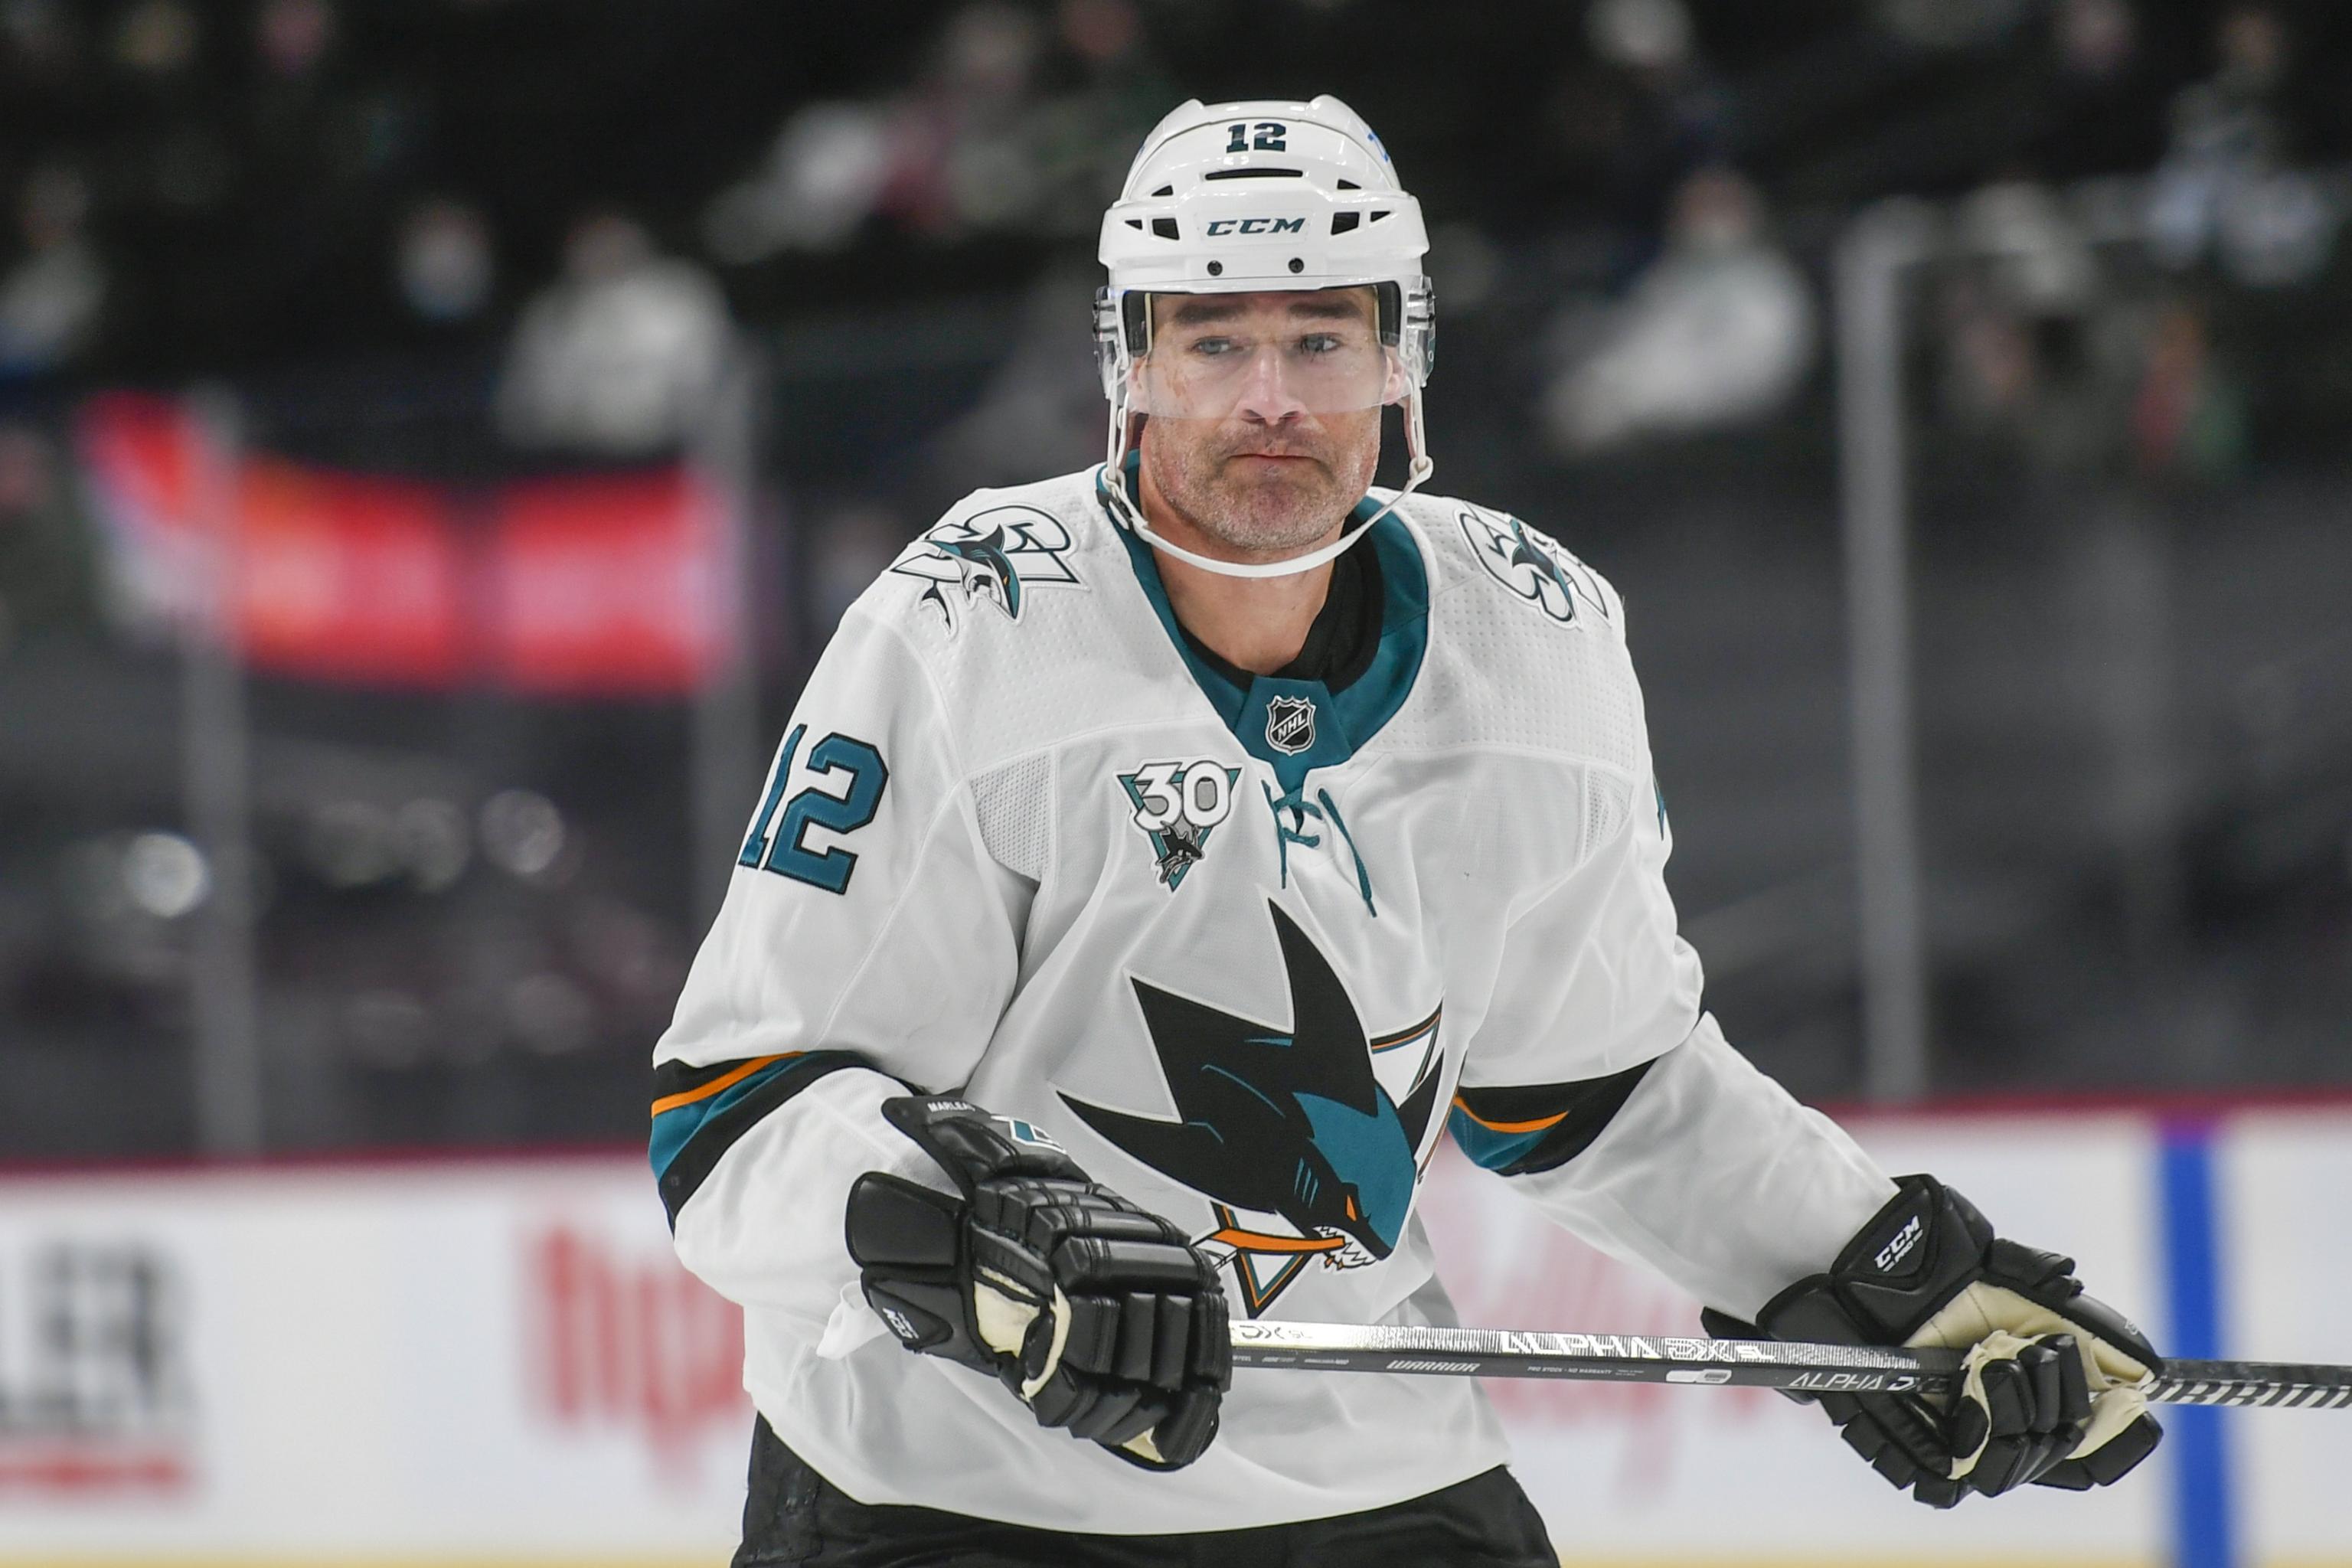 NHL - The all-time GP leader in NHL history, Patrick Marleau